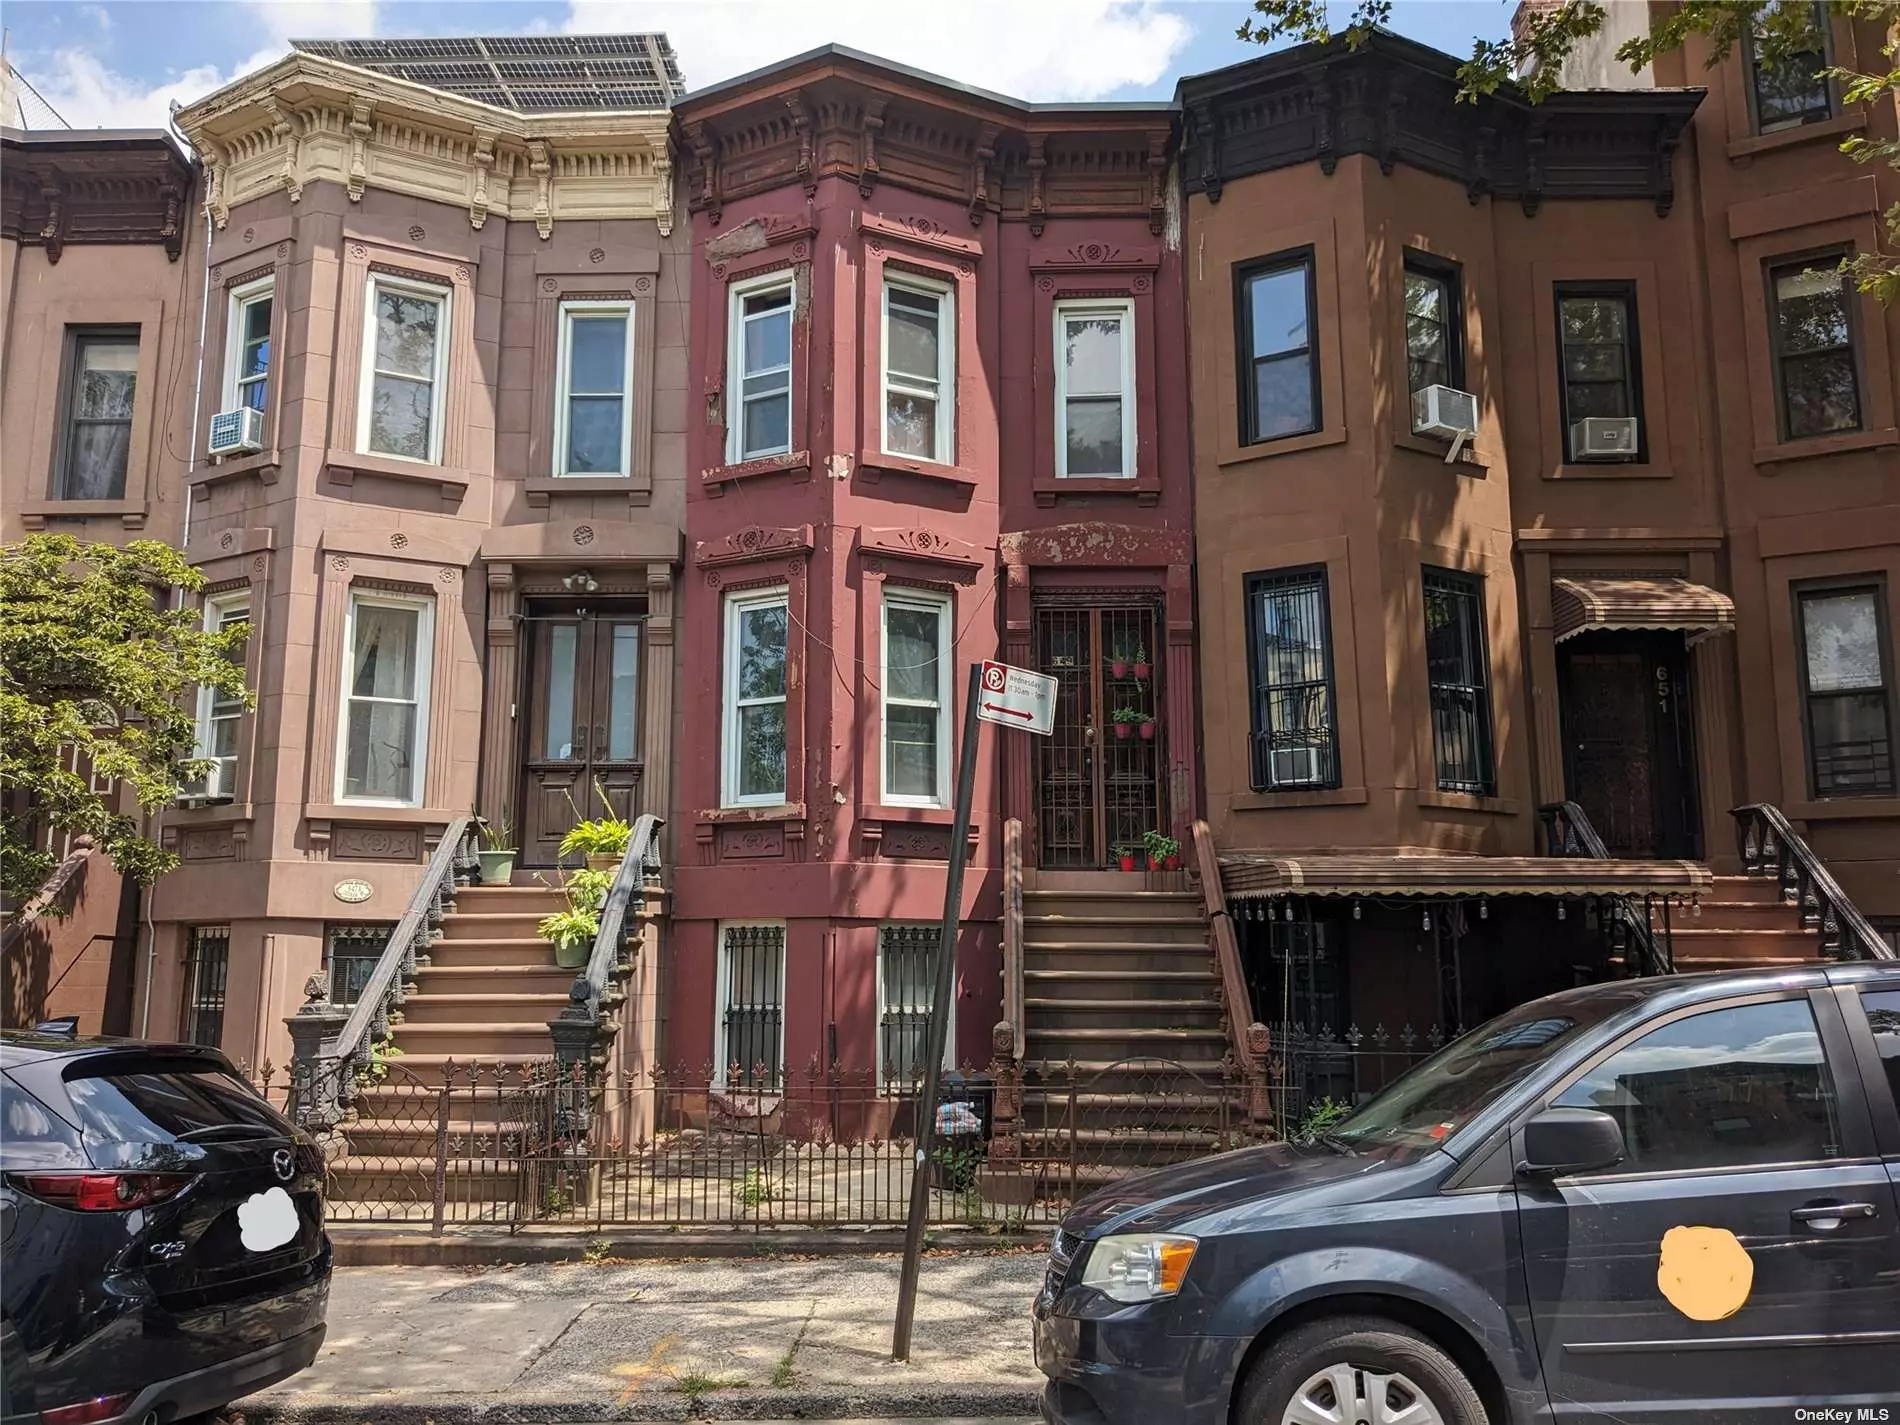 Location, Location, Location: Don&rsquo;t miss this opportunity to make this exceptional two-family Park Slope brownstone your own. It is an incredible opportunity for you to put your creative flair into its transformation. The owner&rsquo;s duplex features 3 bedrooms and 1 bathroom, a spacious eat-in kitchen, 2 working fireplaces and a skylight above the staircase. The lower level features a one one-bedroom unit with a spacious eat-in kitchen. The spaces are versatile and can be utilized in any way that accommodates your unique needs. Closets abound in both units. The basement is unfinished and is used only as the mechanical room. Conveniently located in this highly coveted Brooklyn neighborhood, you&rsquo;ll enjoy easy access to an array of amenities to include, trendy boutiques and art galleries to renowned restaurants and cultural attractions. Nearby access to public transportation, including subway lines and bus routes, makes it effortless to explore all that New York City has to offer. Enjoy a short stroll to Prospect Park or take advantage of the neighborhood&rsquo;s proximity to the Brooklyn Bridge and Manhattan for endless entertainment and adventure. Seller will consider all reasonable offers.  Call ahead to schedule a showing. 24-hour advance notice required.